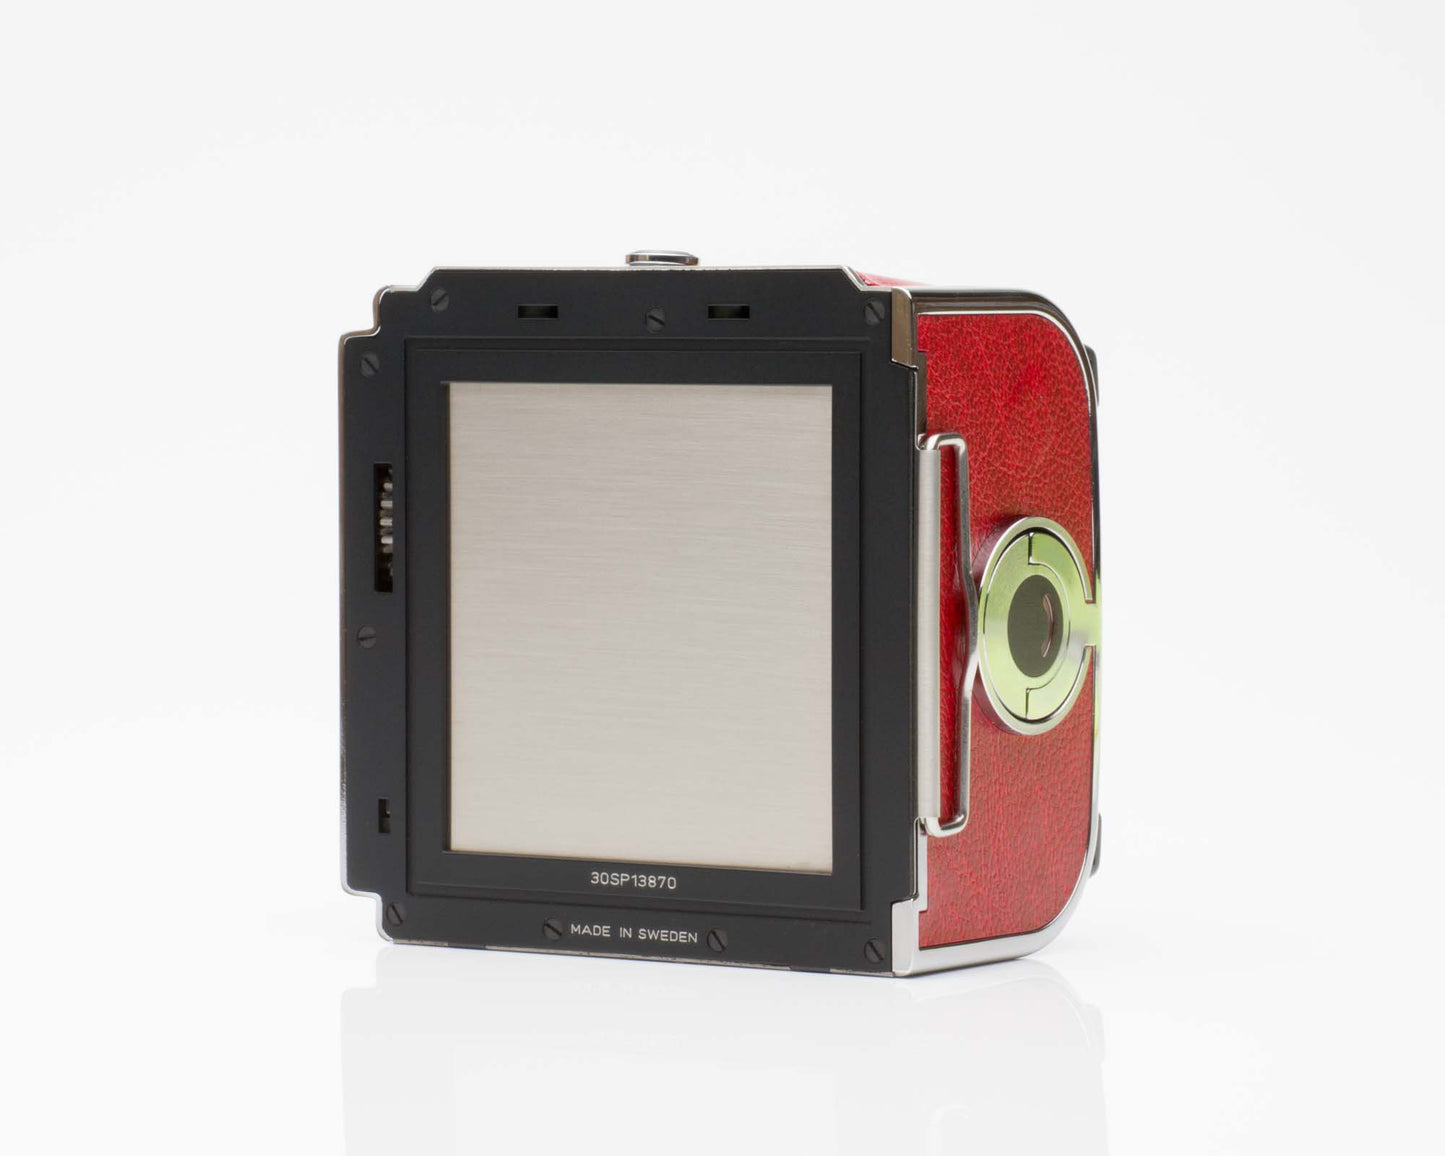 Hasselblad A12 Chrome Red Film Back New Old Stock 30182 3030182